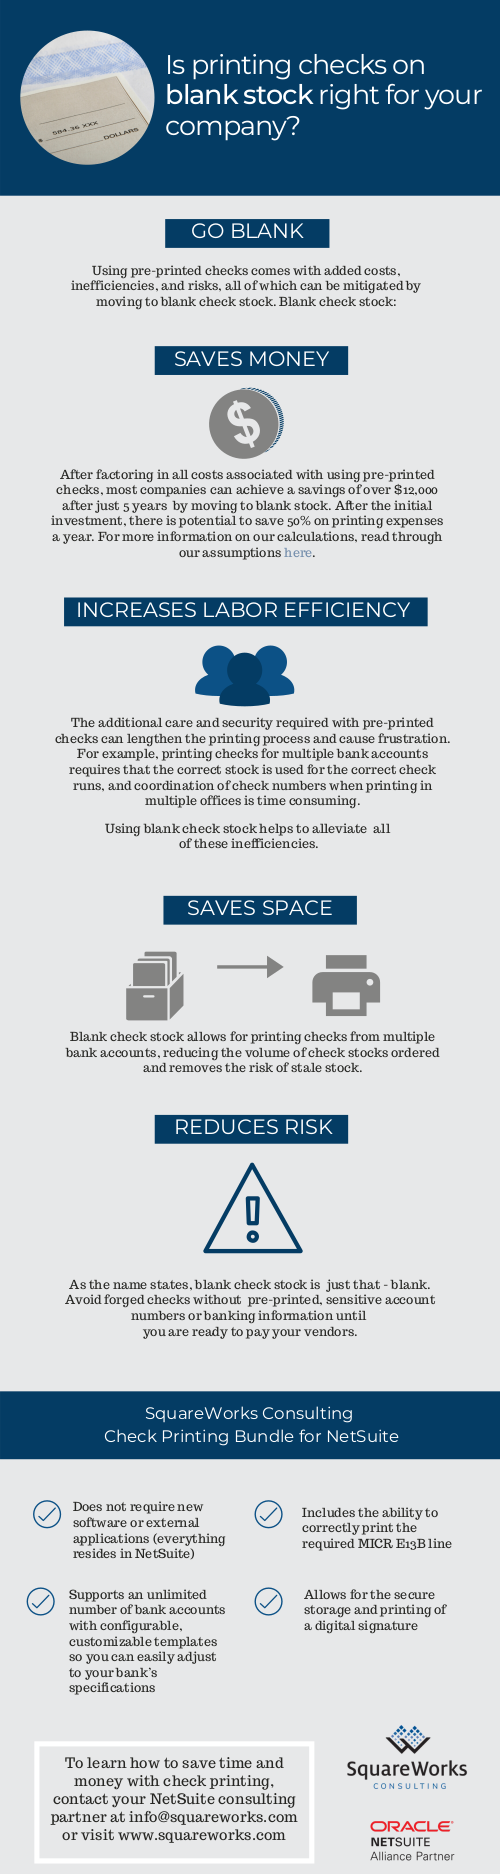 Check Printing Infographic - SquareWorks Consulting